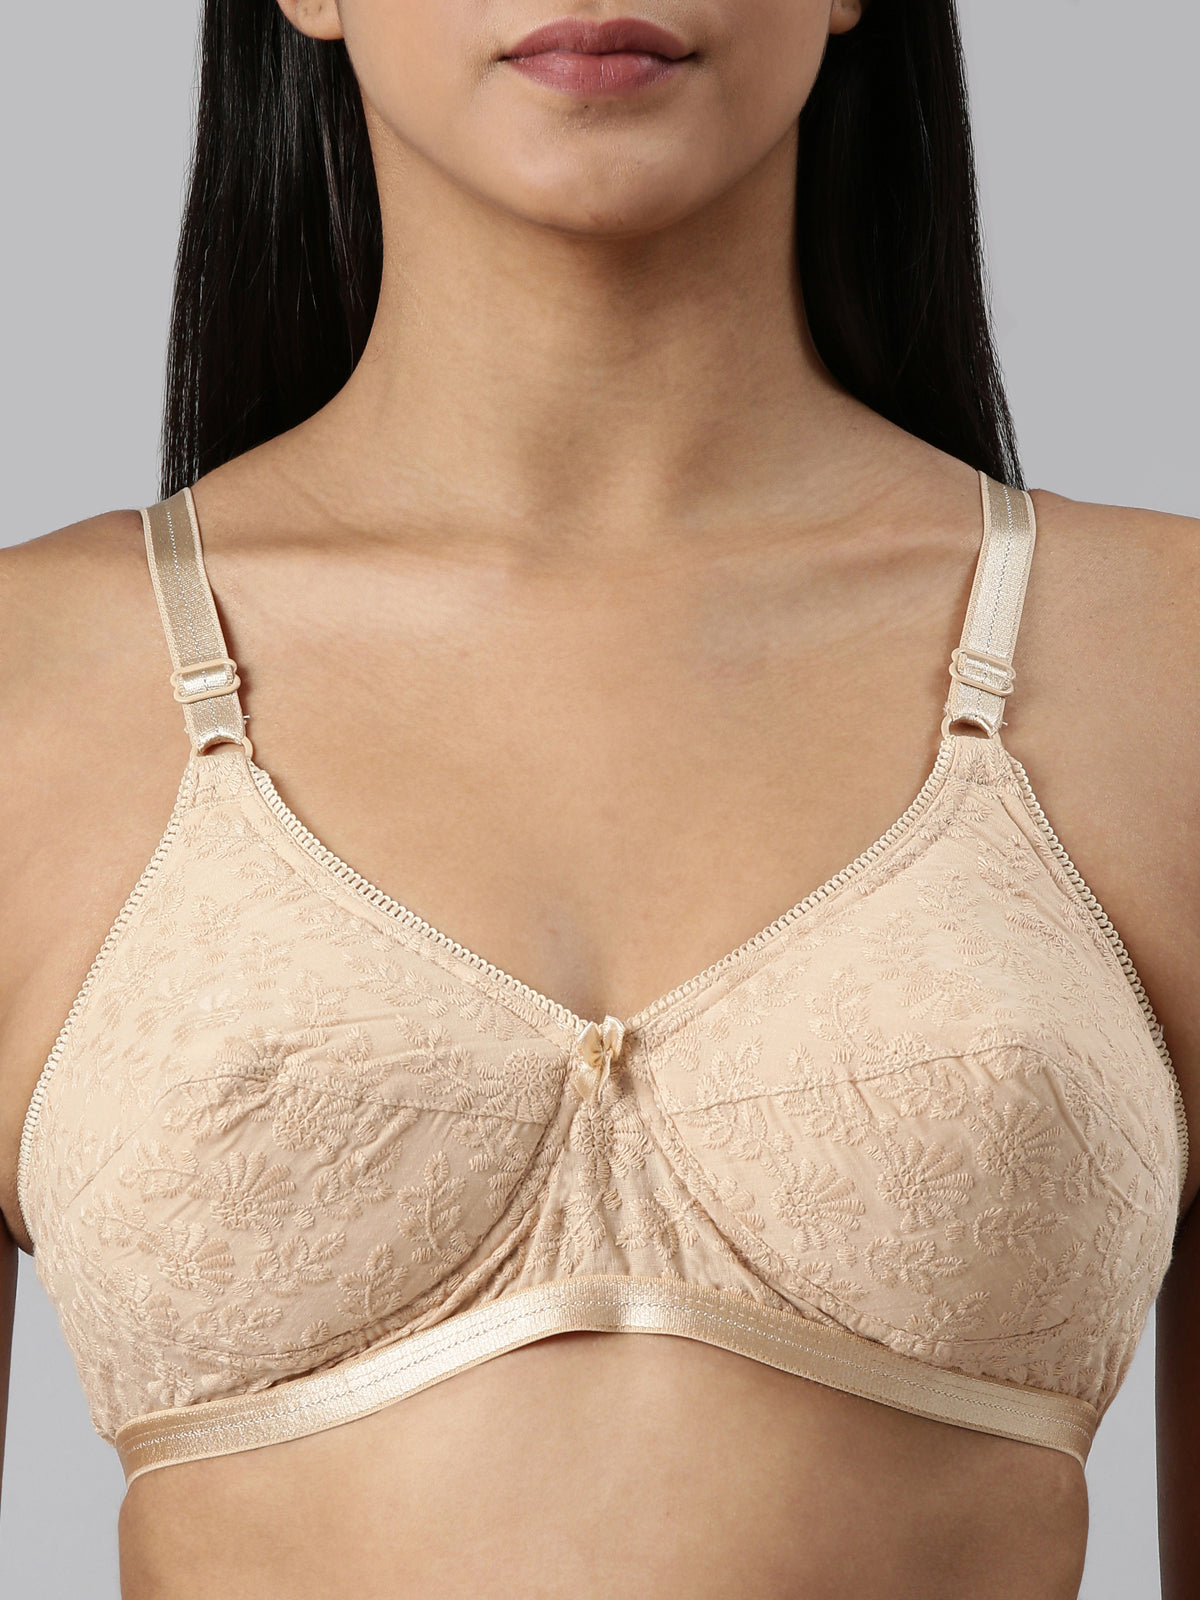 BODYCARE 6585S Poly Cotton BCD Cup Full Coverage Seamless Bra (34C, Skin)  in Ernakulam at best price by Blossom Inners Pvt. Ltd. - Justdial